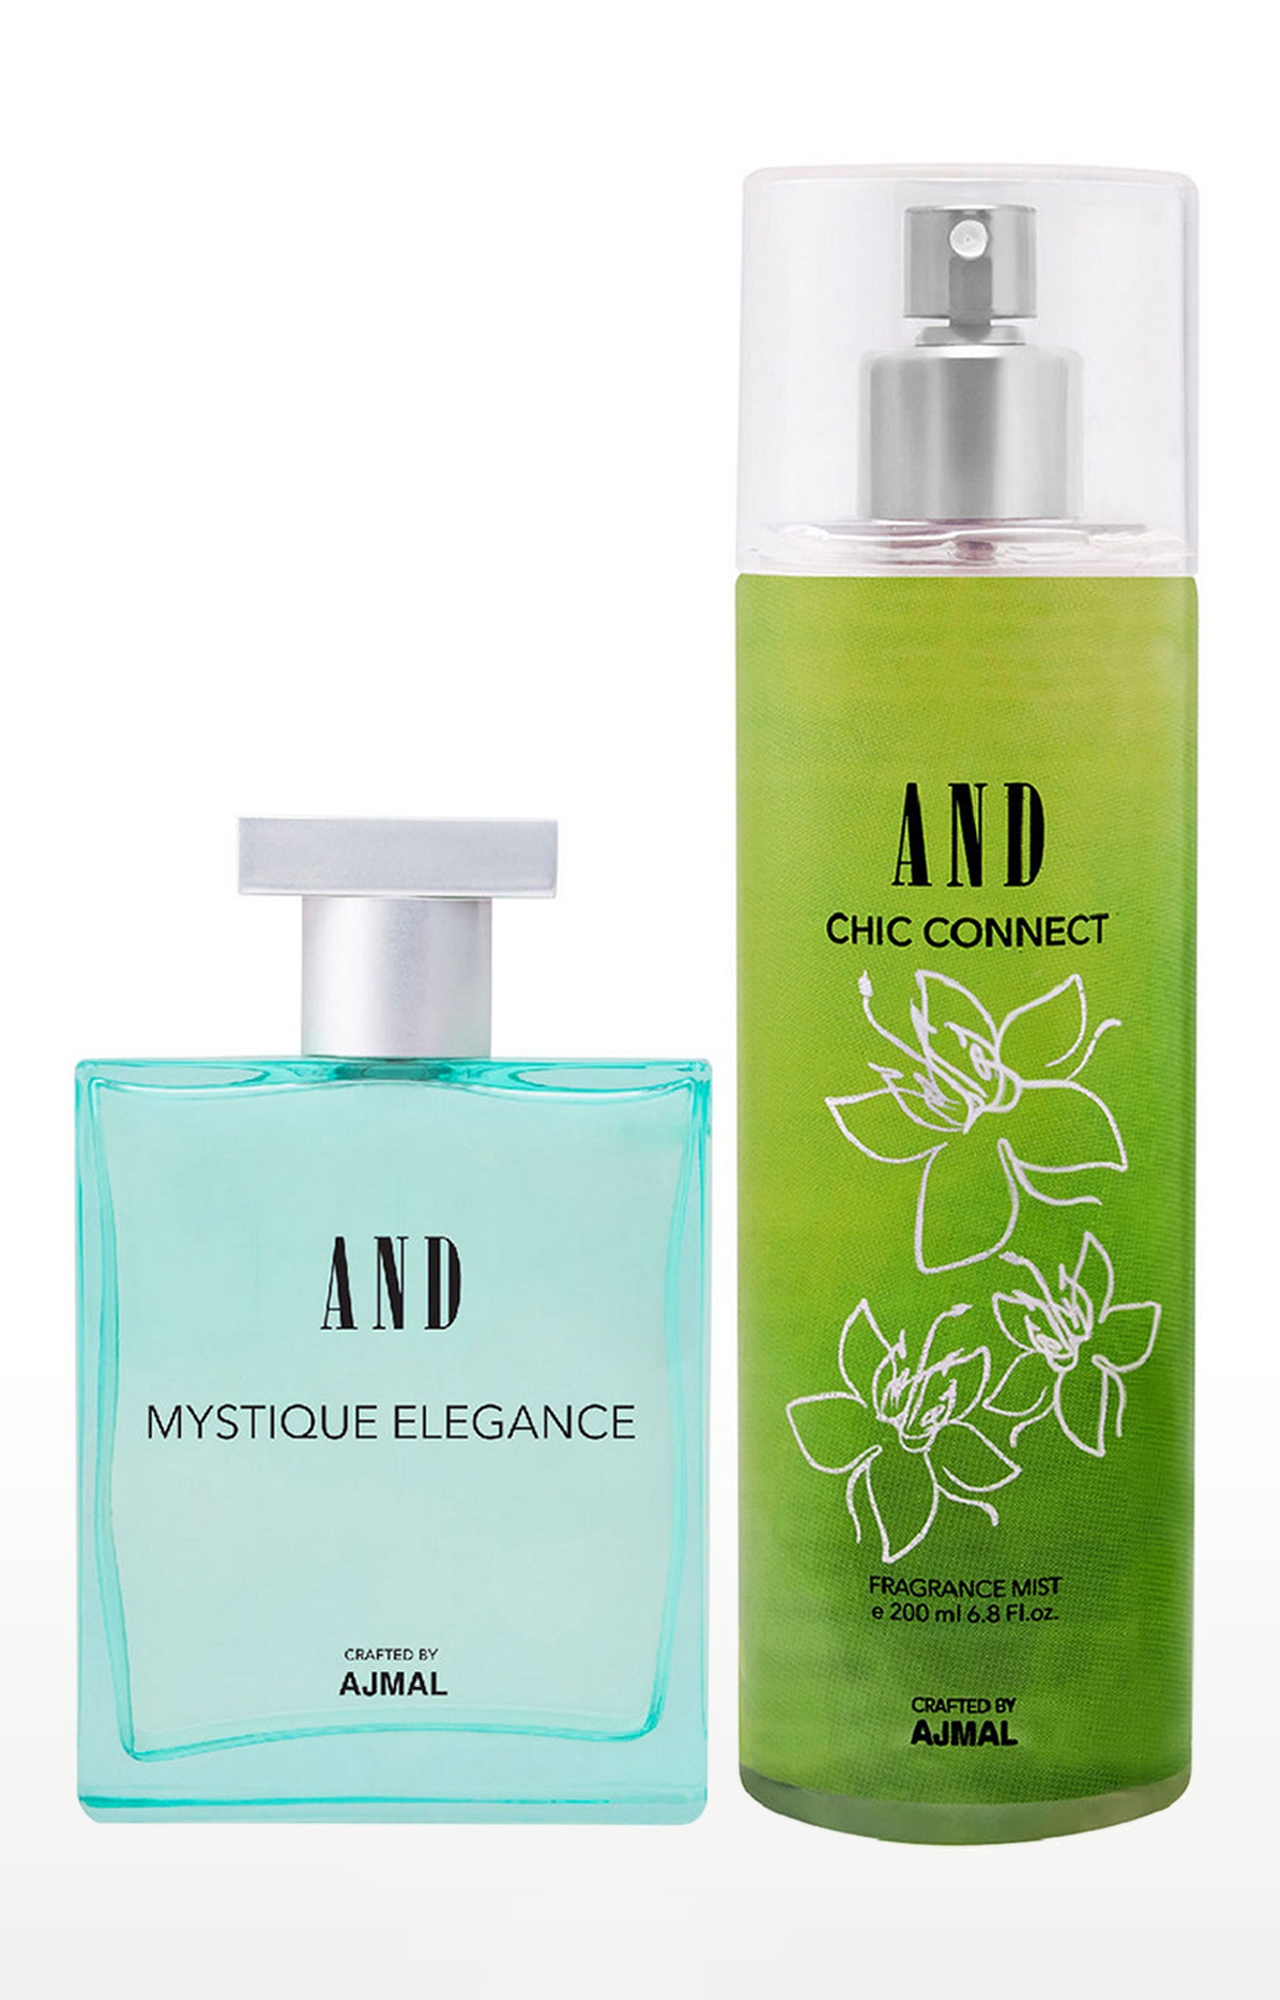 AND Mystique Elegance Eau De Parfum 50ML & Chic Connect Body Mist 200ML Pack of 2 for Women Crafted by Ajmal 